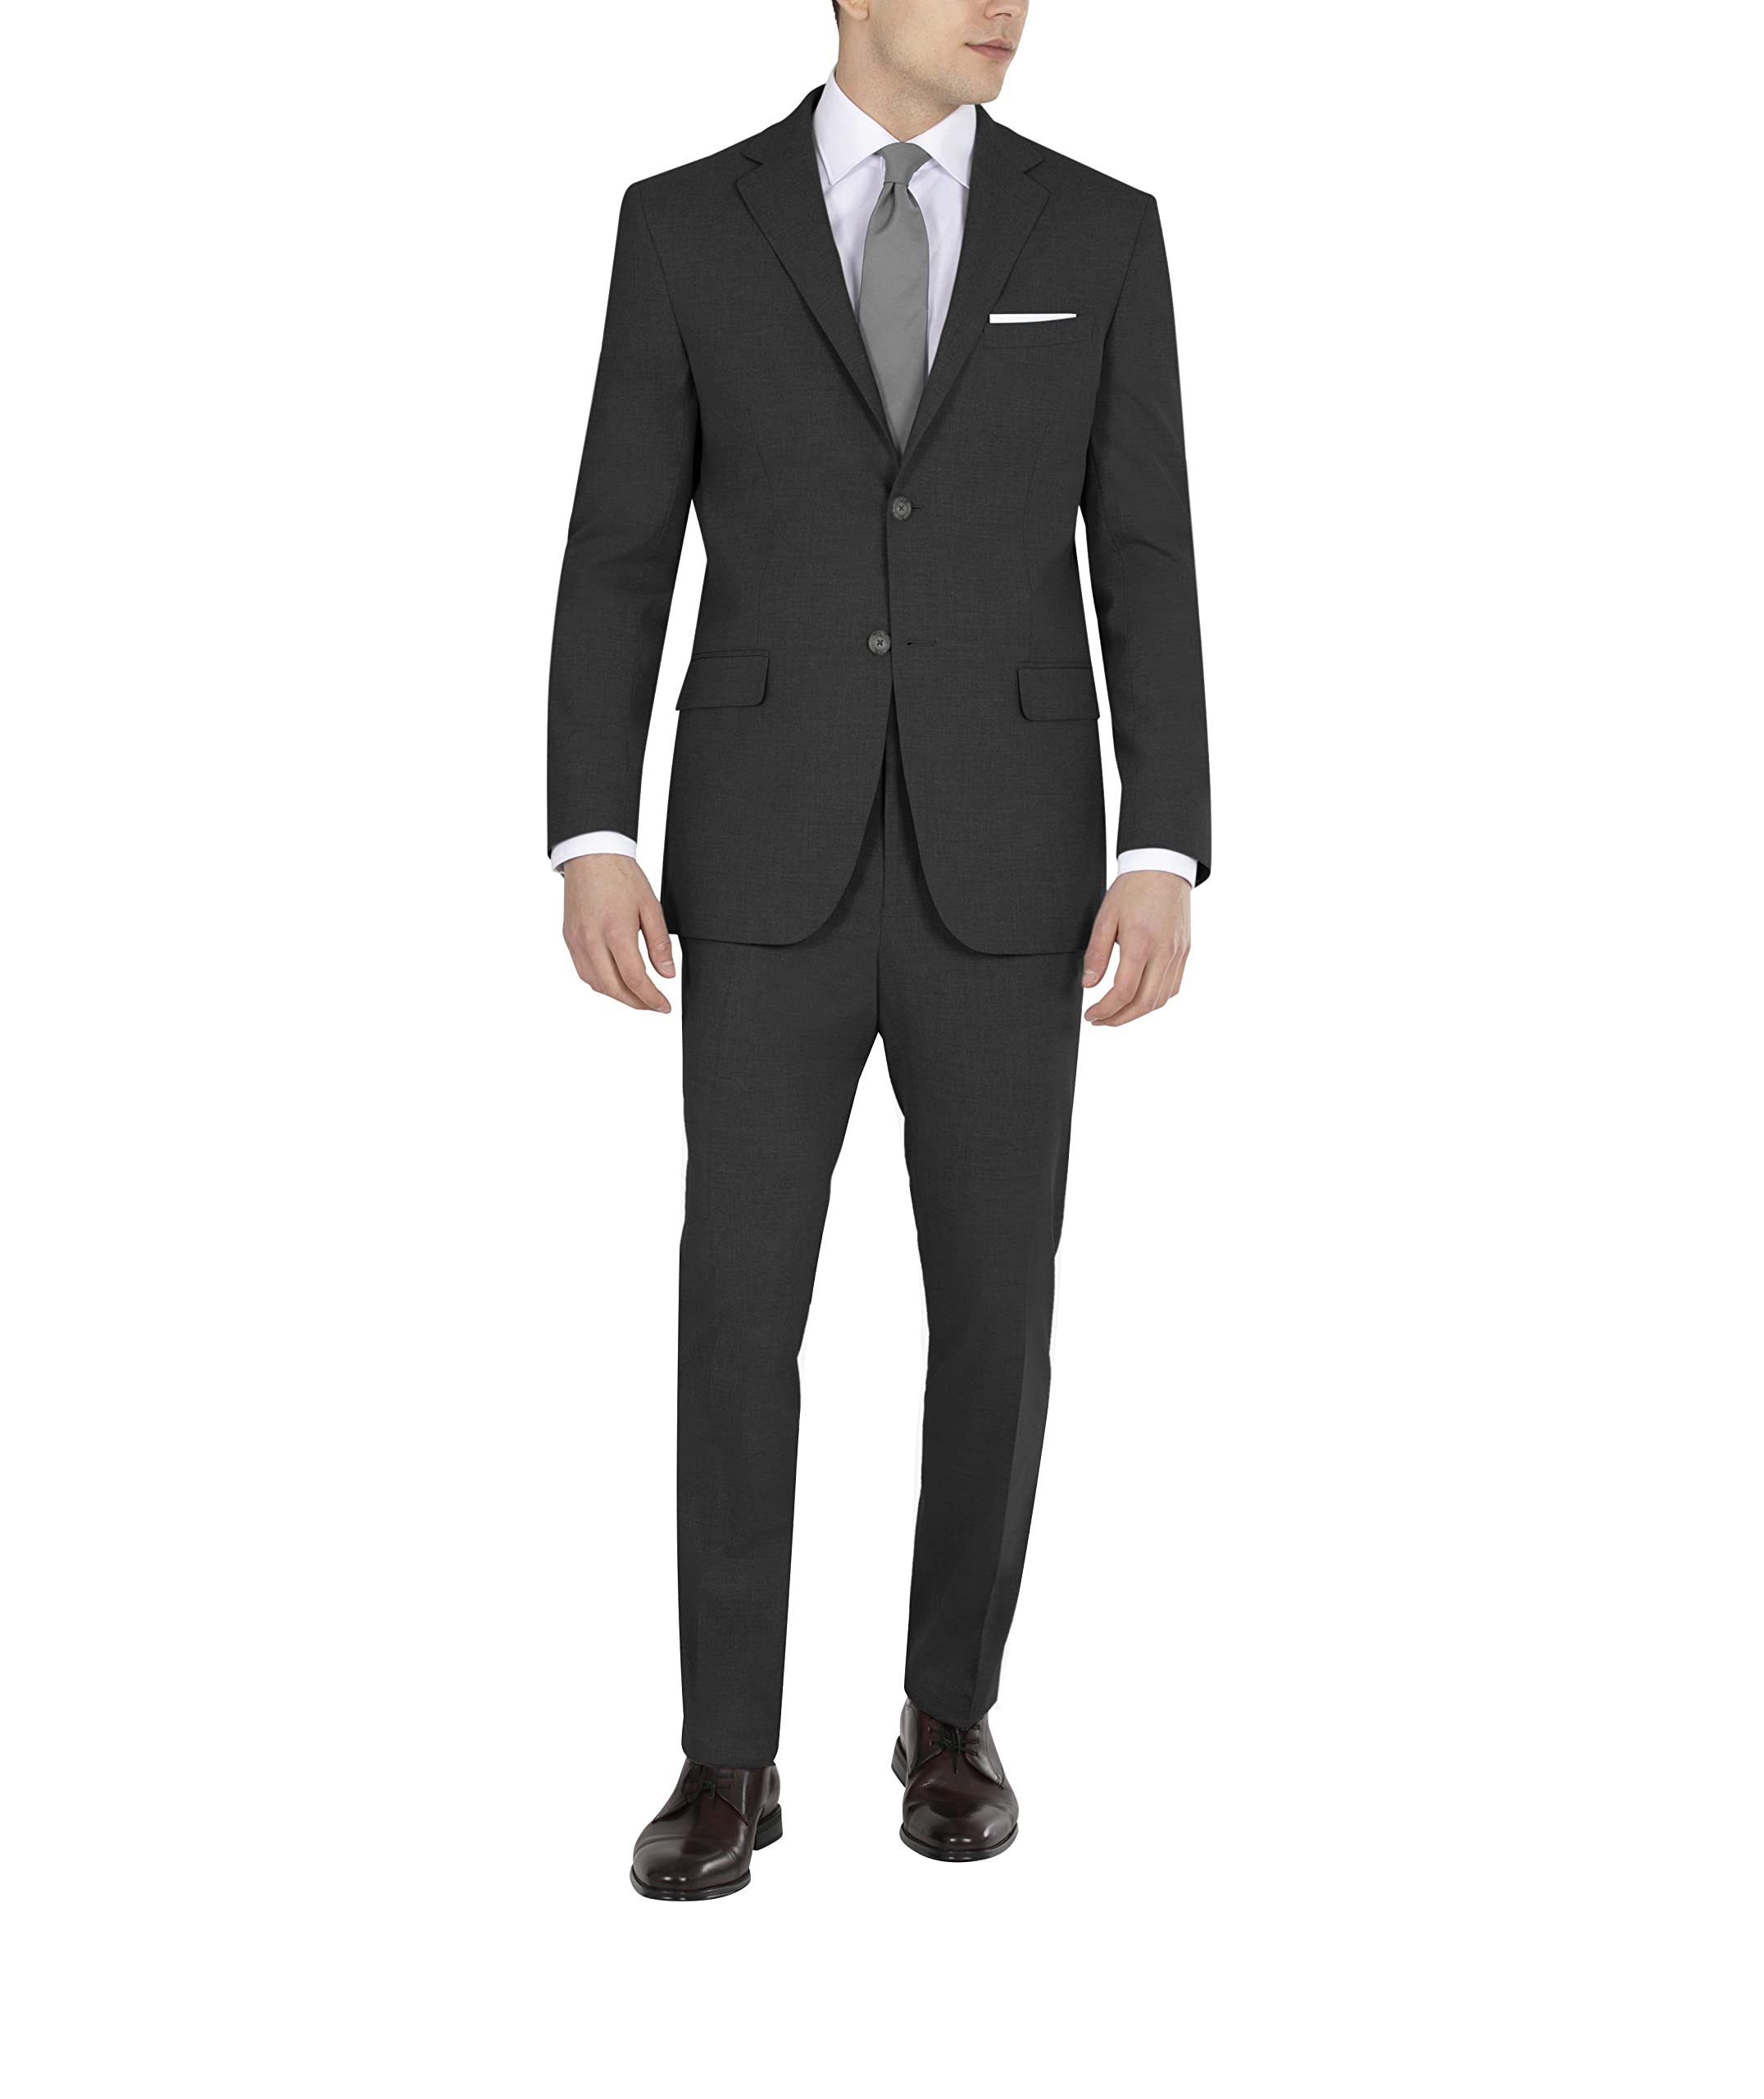 DKNY Men's Modern Fit High Performance Suit Separates